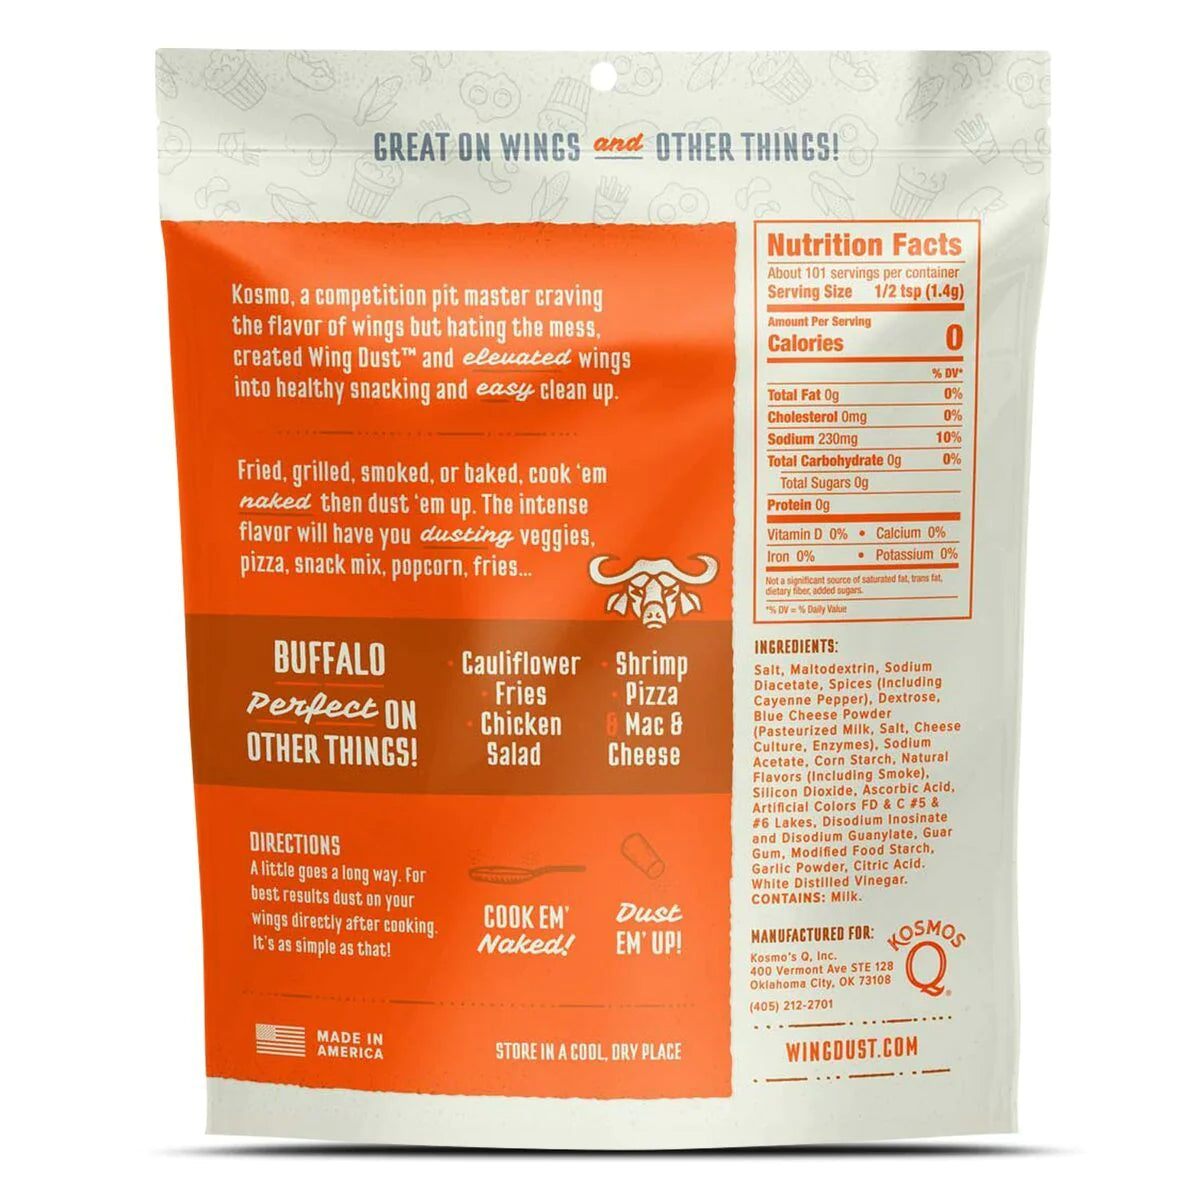 Kosmos Q Buffalo Wing Seasoning nutrition facts and ingredients